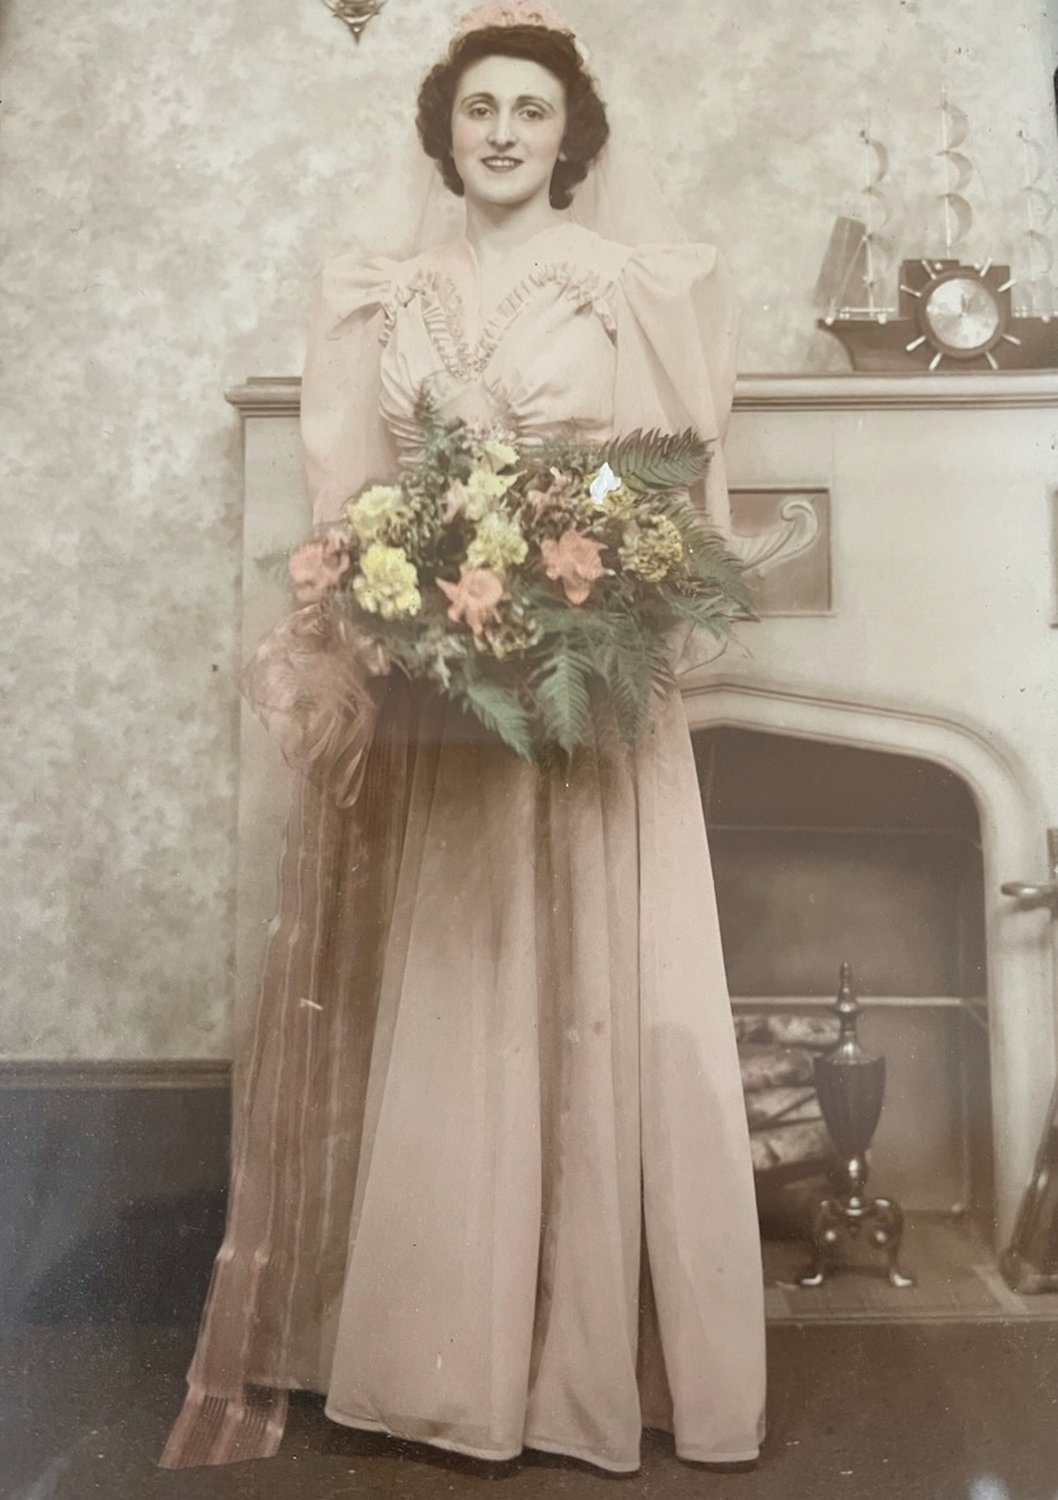 ALL DRESSED UP: About 80 years ago, Josephine “Josie” Celentano got all dressed up for a relative’s wedding.